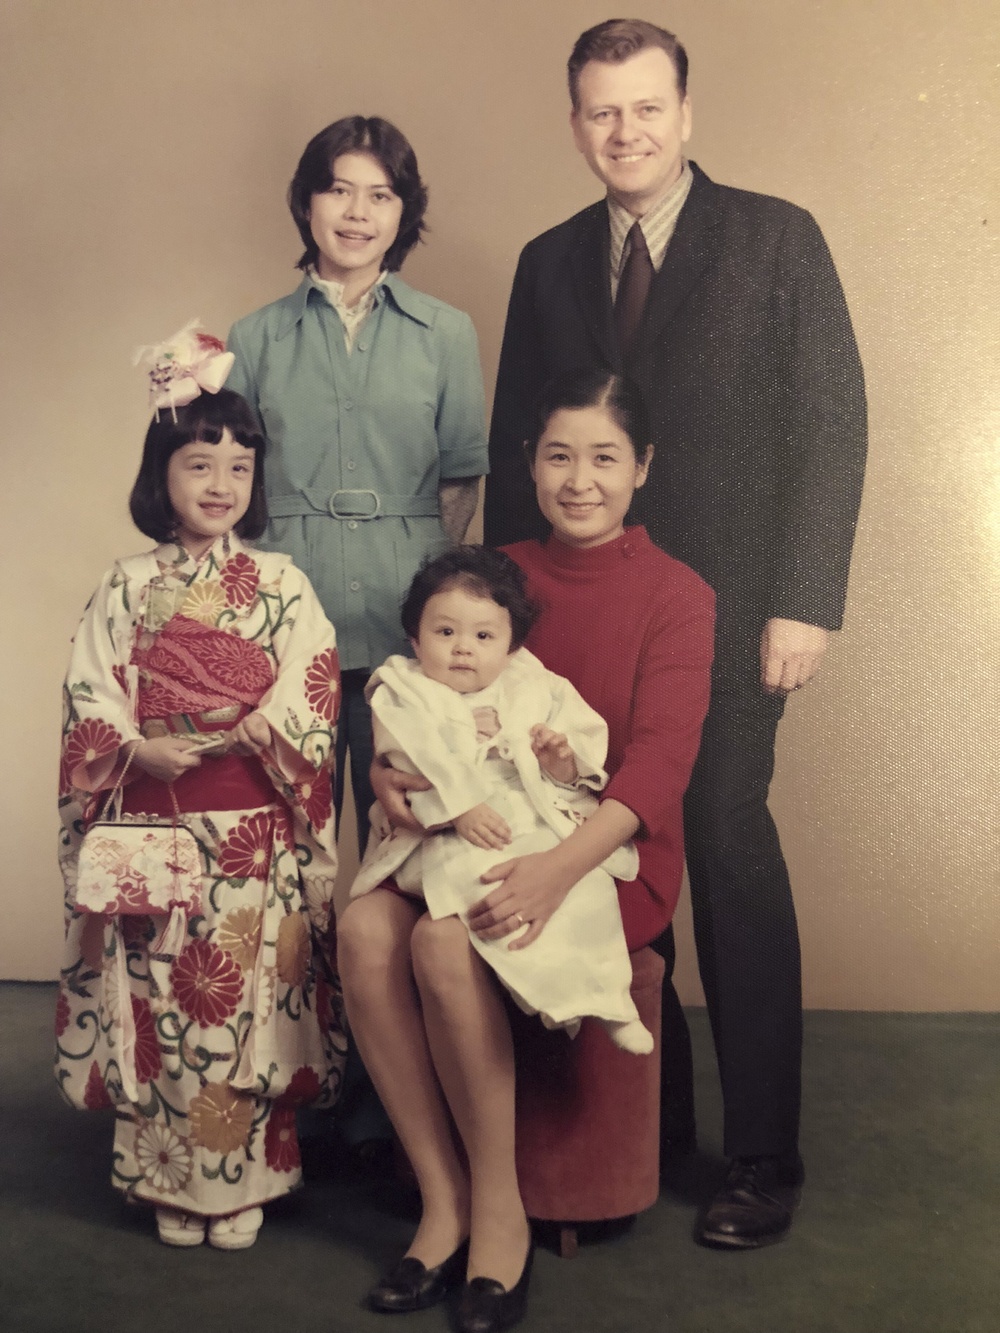 Reflecting on our ancestors: Asian American, Pacific Islander Heritage Month